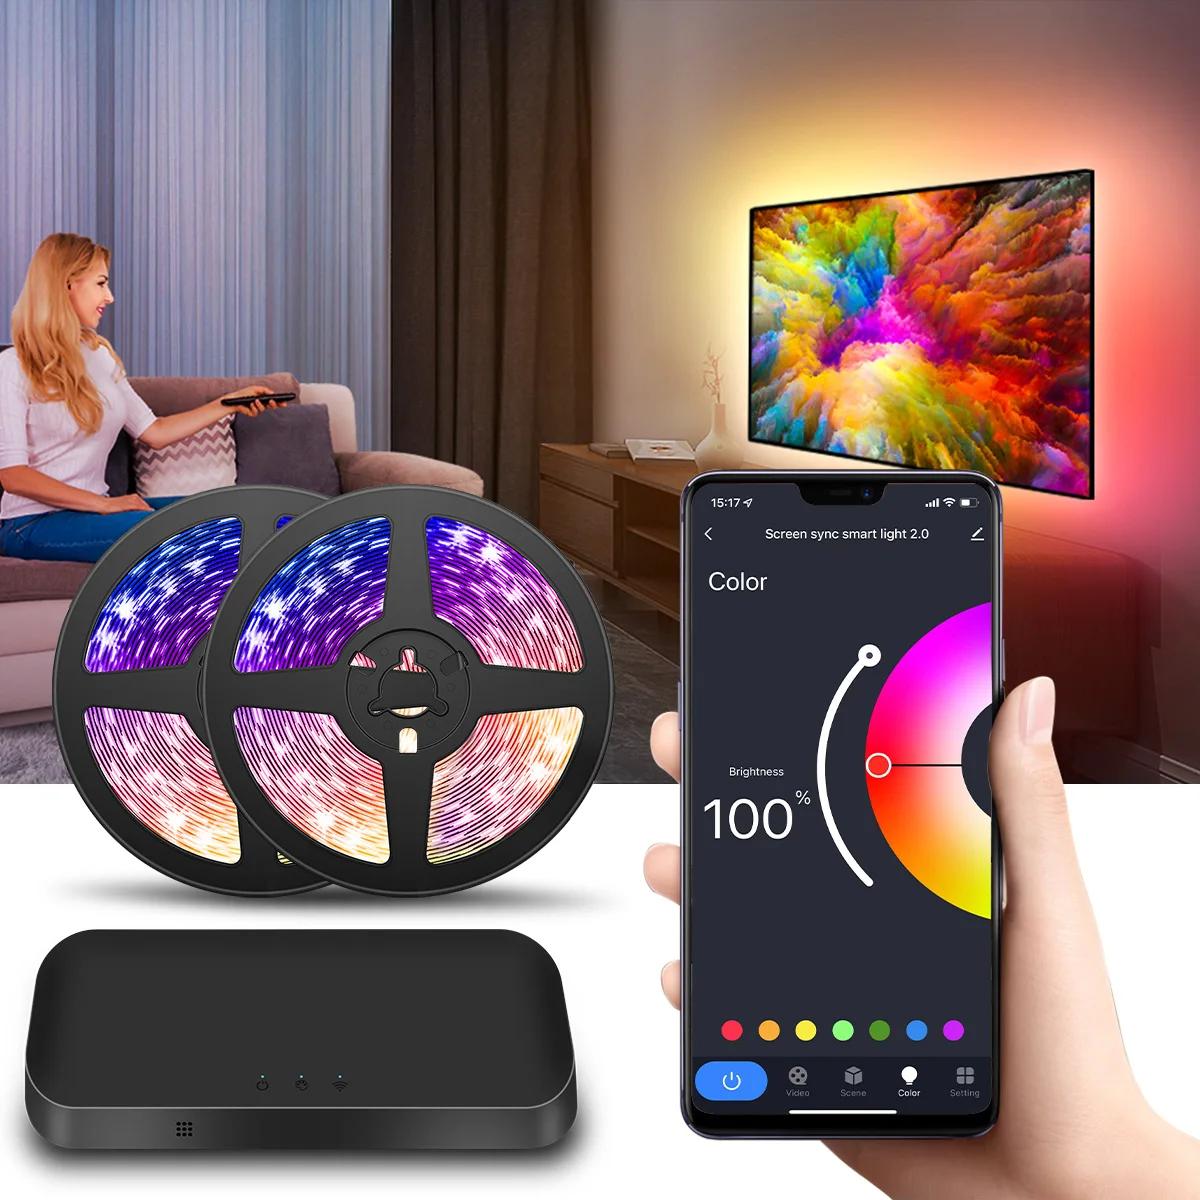 

PineLake Fancy Ambient Light LED Sync Box TV Backlight Strips Immersion Smart Lighting HDMI Sync Box with TV Kits LED Sync